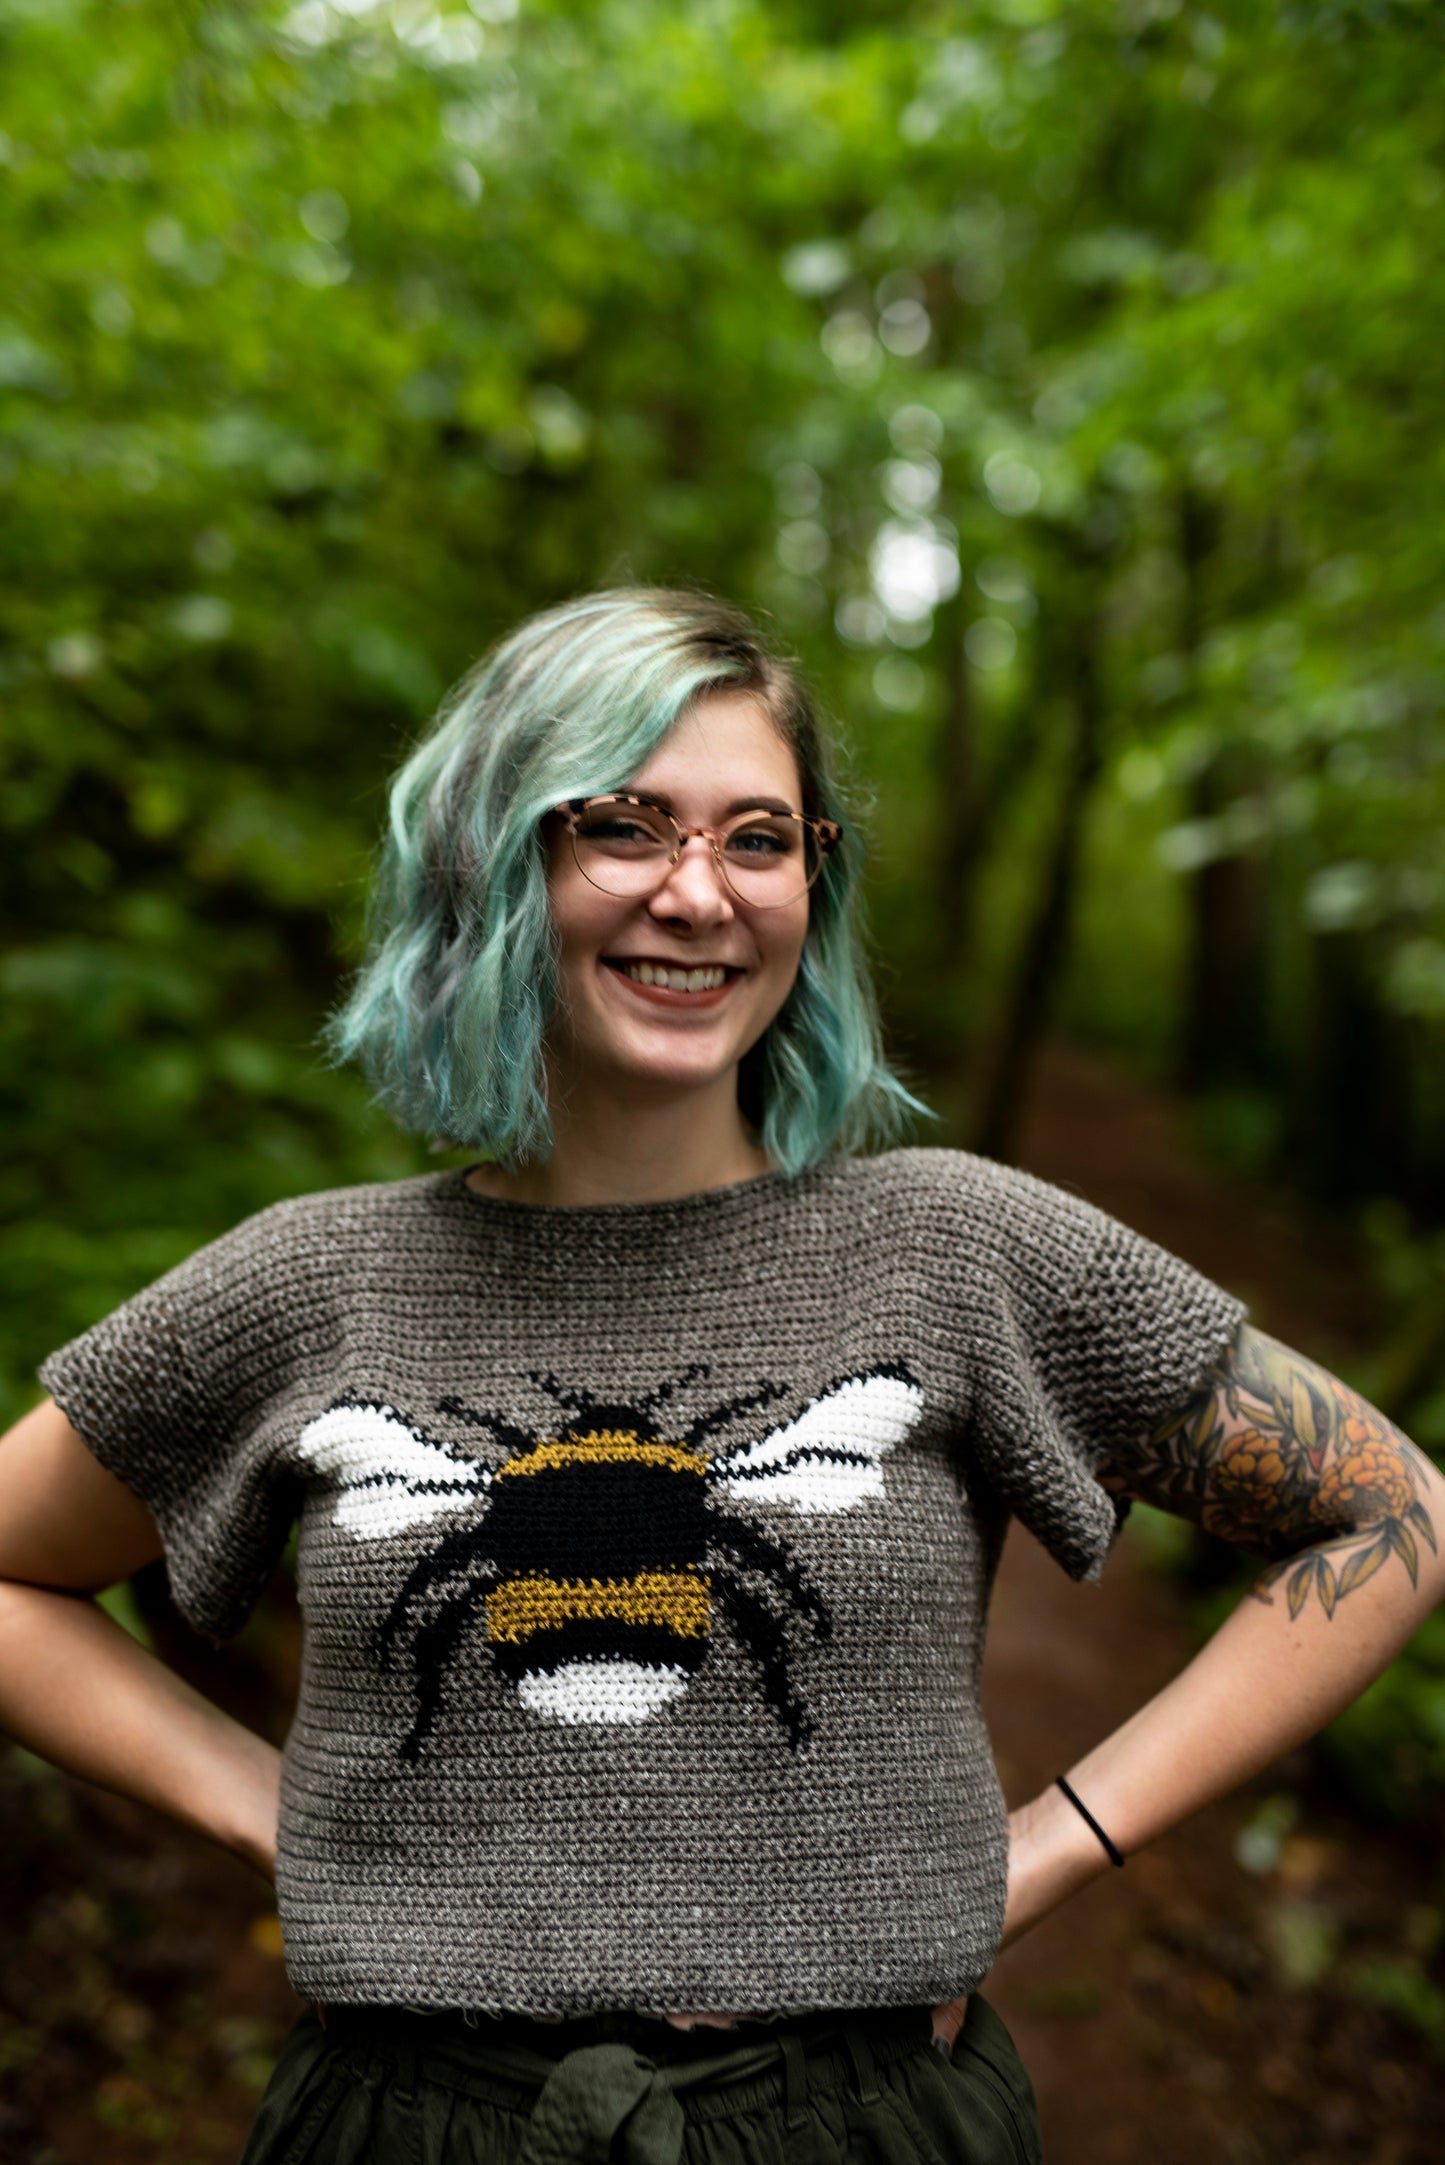 Crochet Pattern: The Bumble Tee